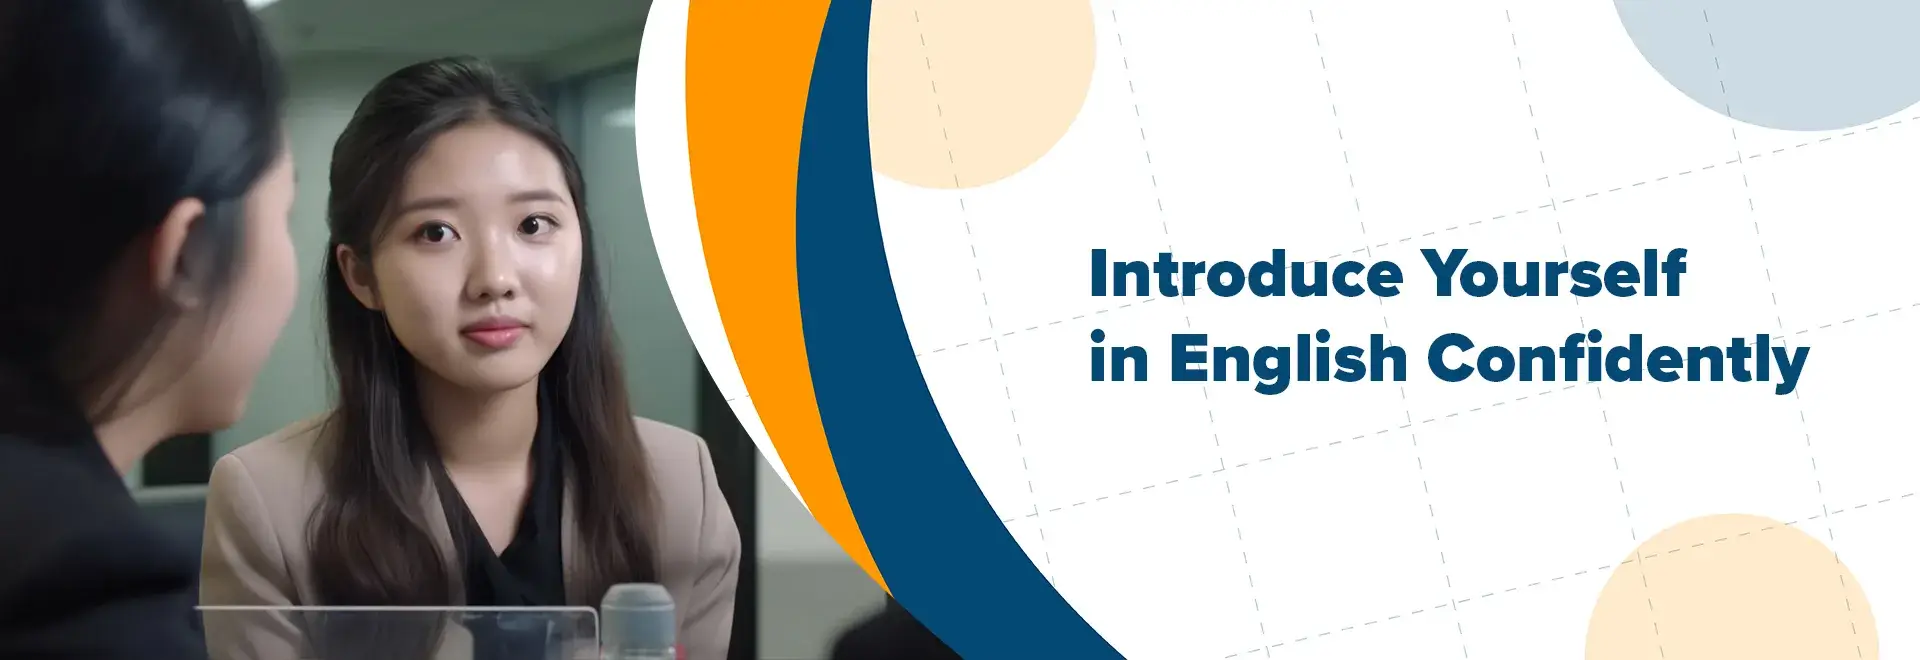 Introduce Yourself in English Confidently: 10 Effective Ways and Examples